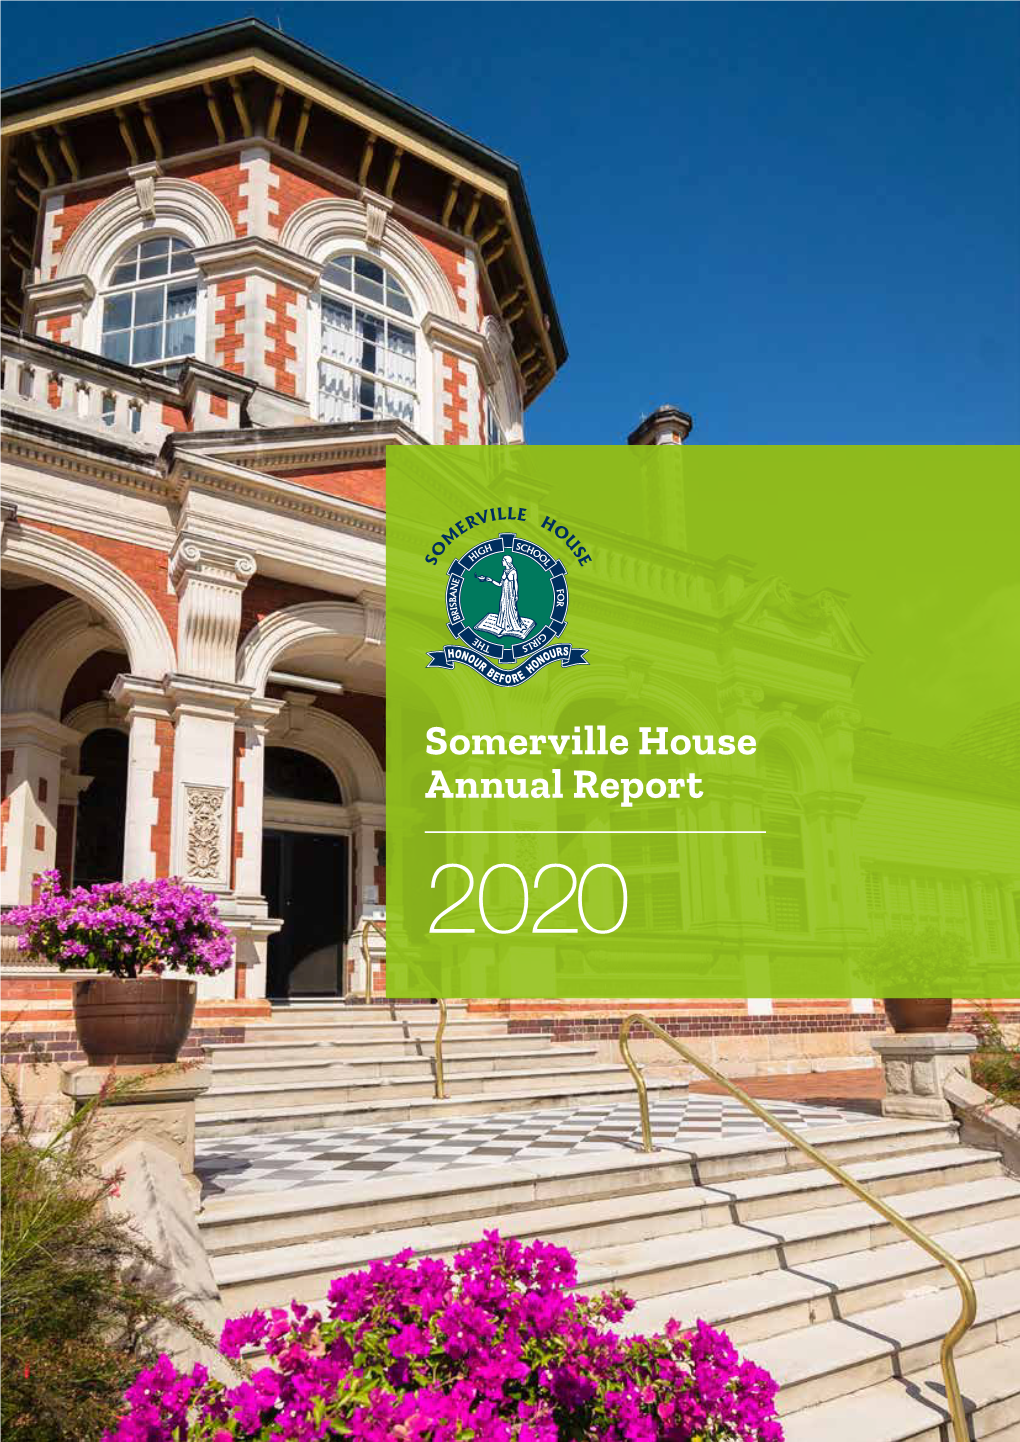 Somerville House Annual Report 2020 Contents